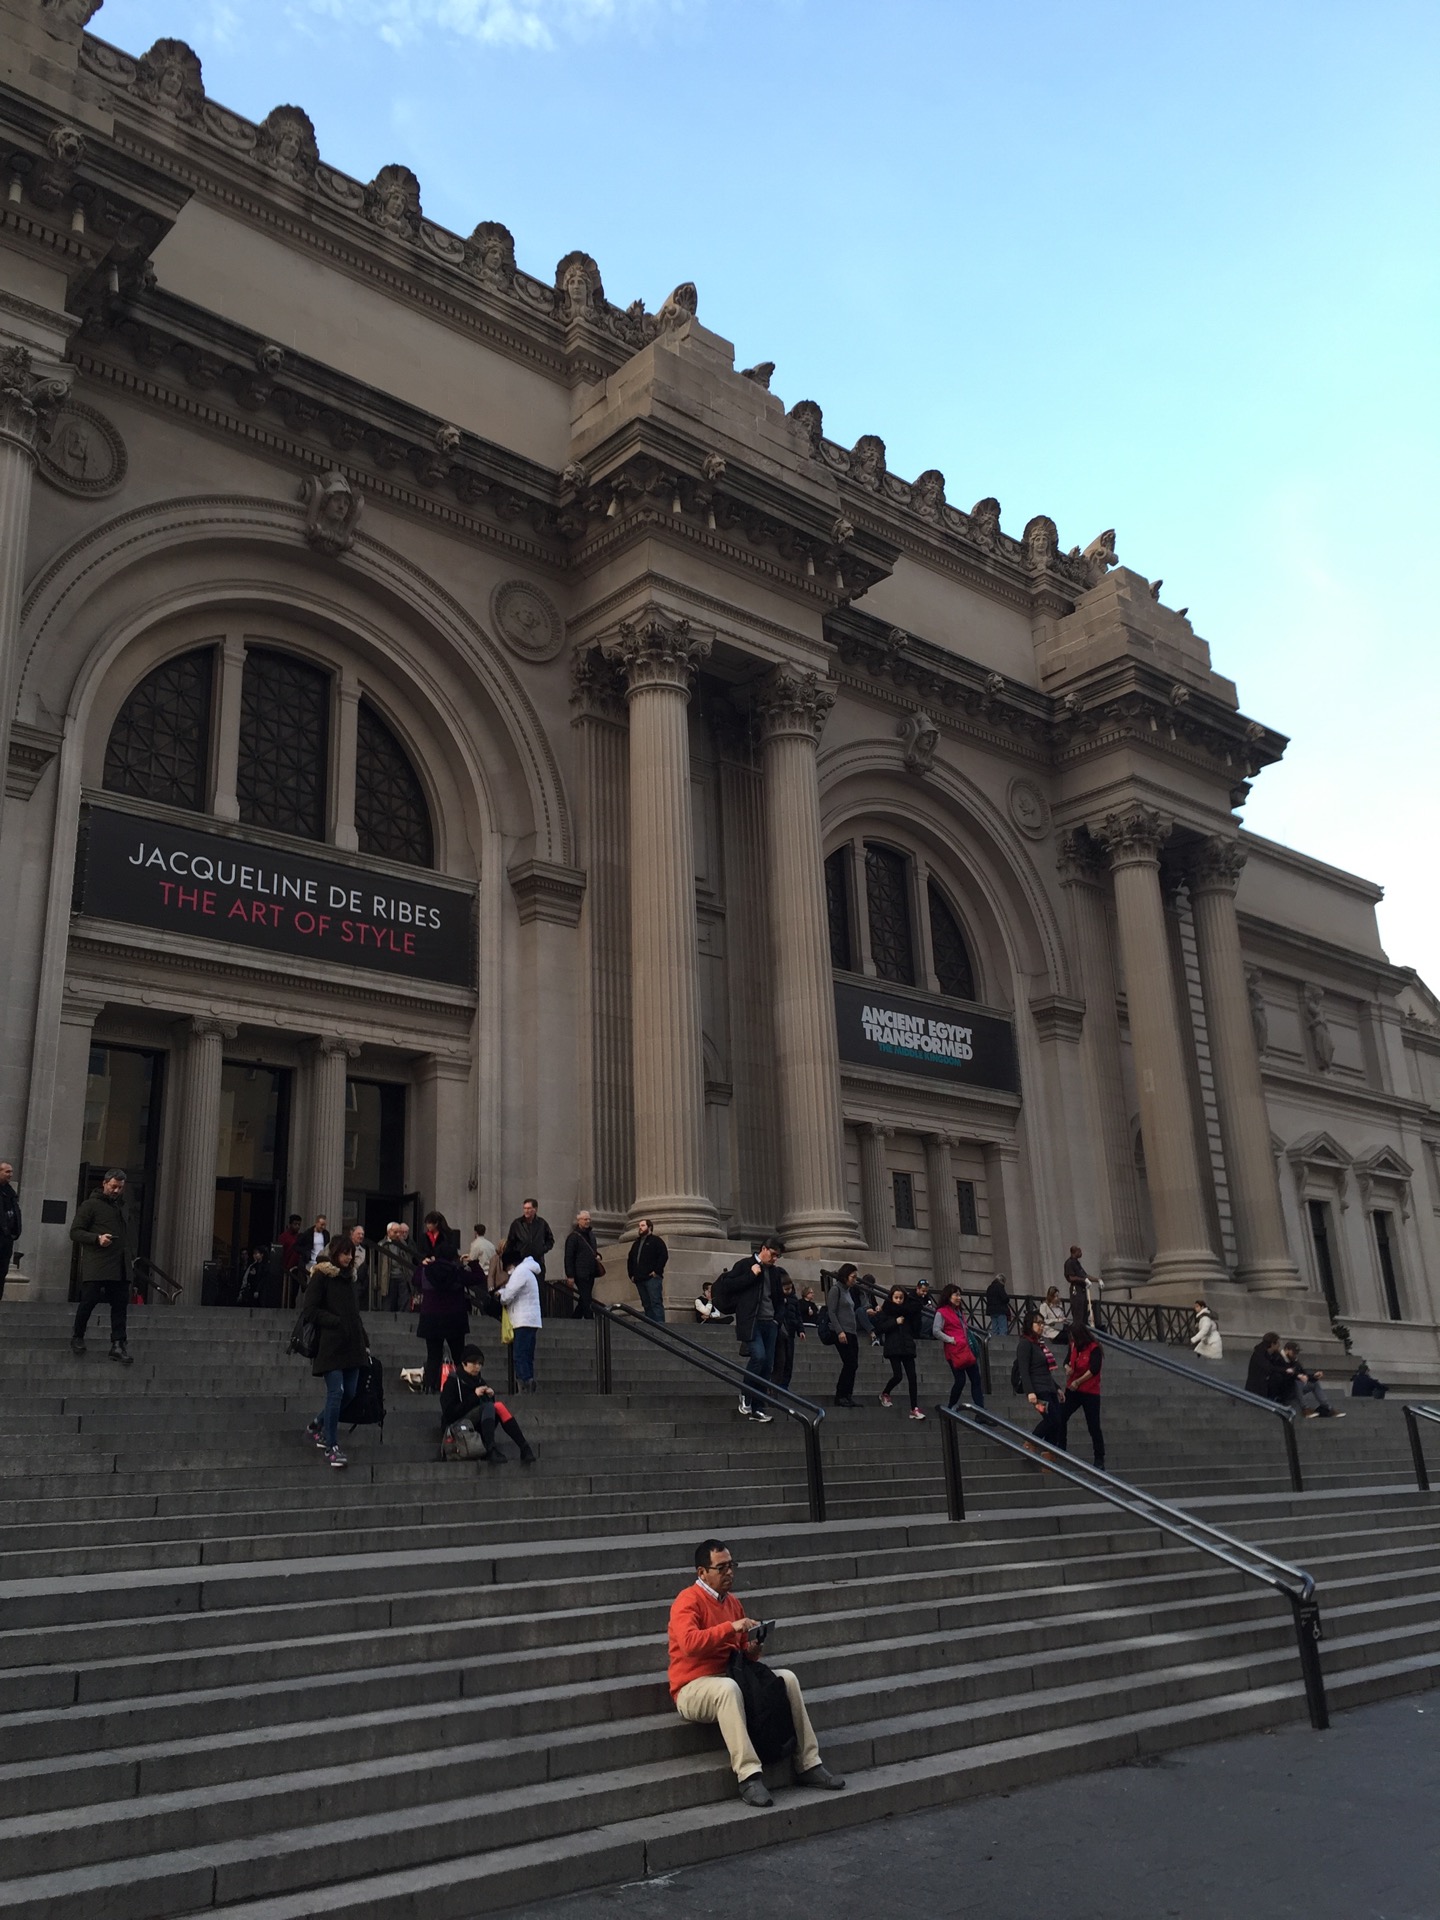 Checked in at The Metropolitan Museum of Art